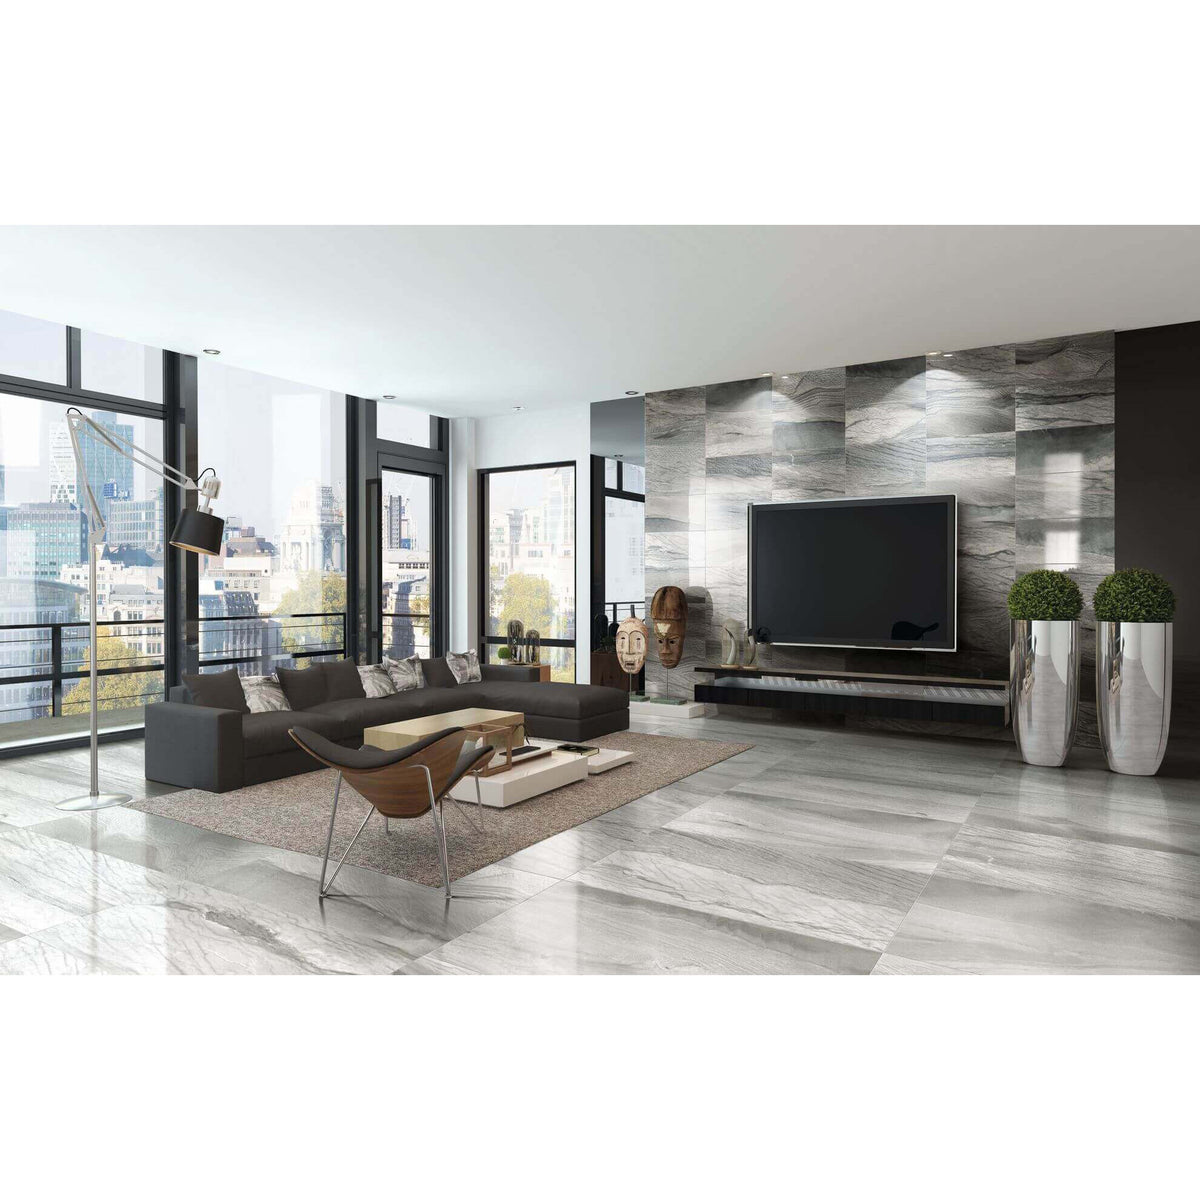 Happy Floors - Macaubas Series 12 in. x 24 in. Rectified Porcelain Tile - Oyster Natural